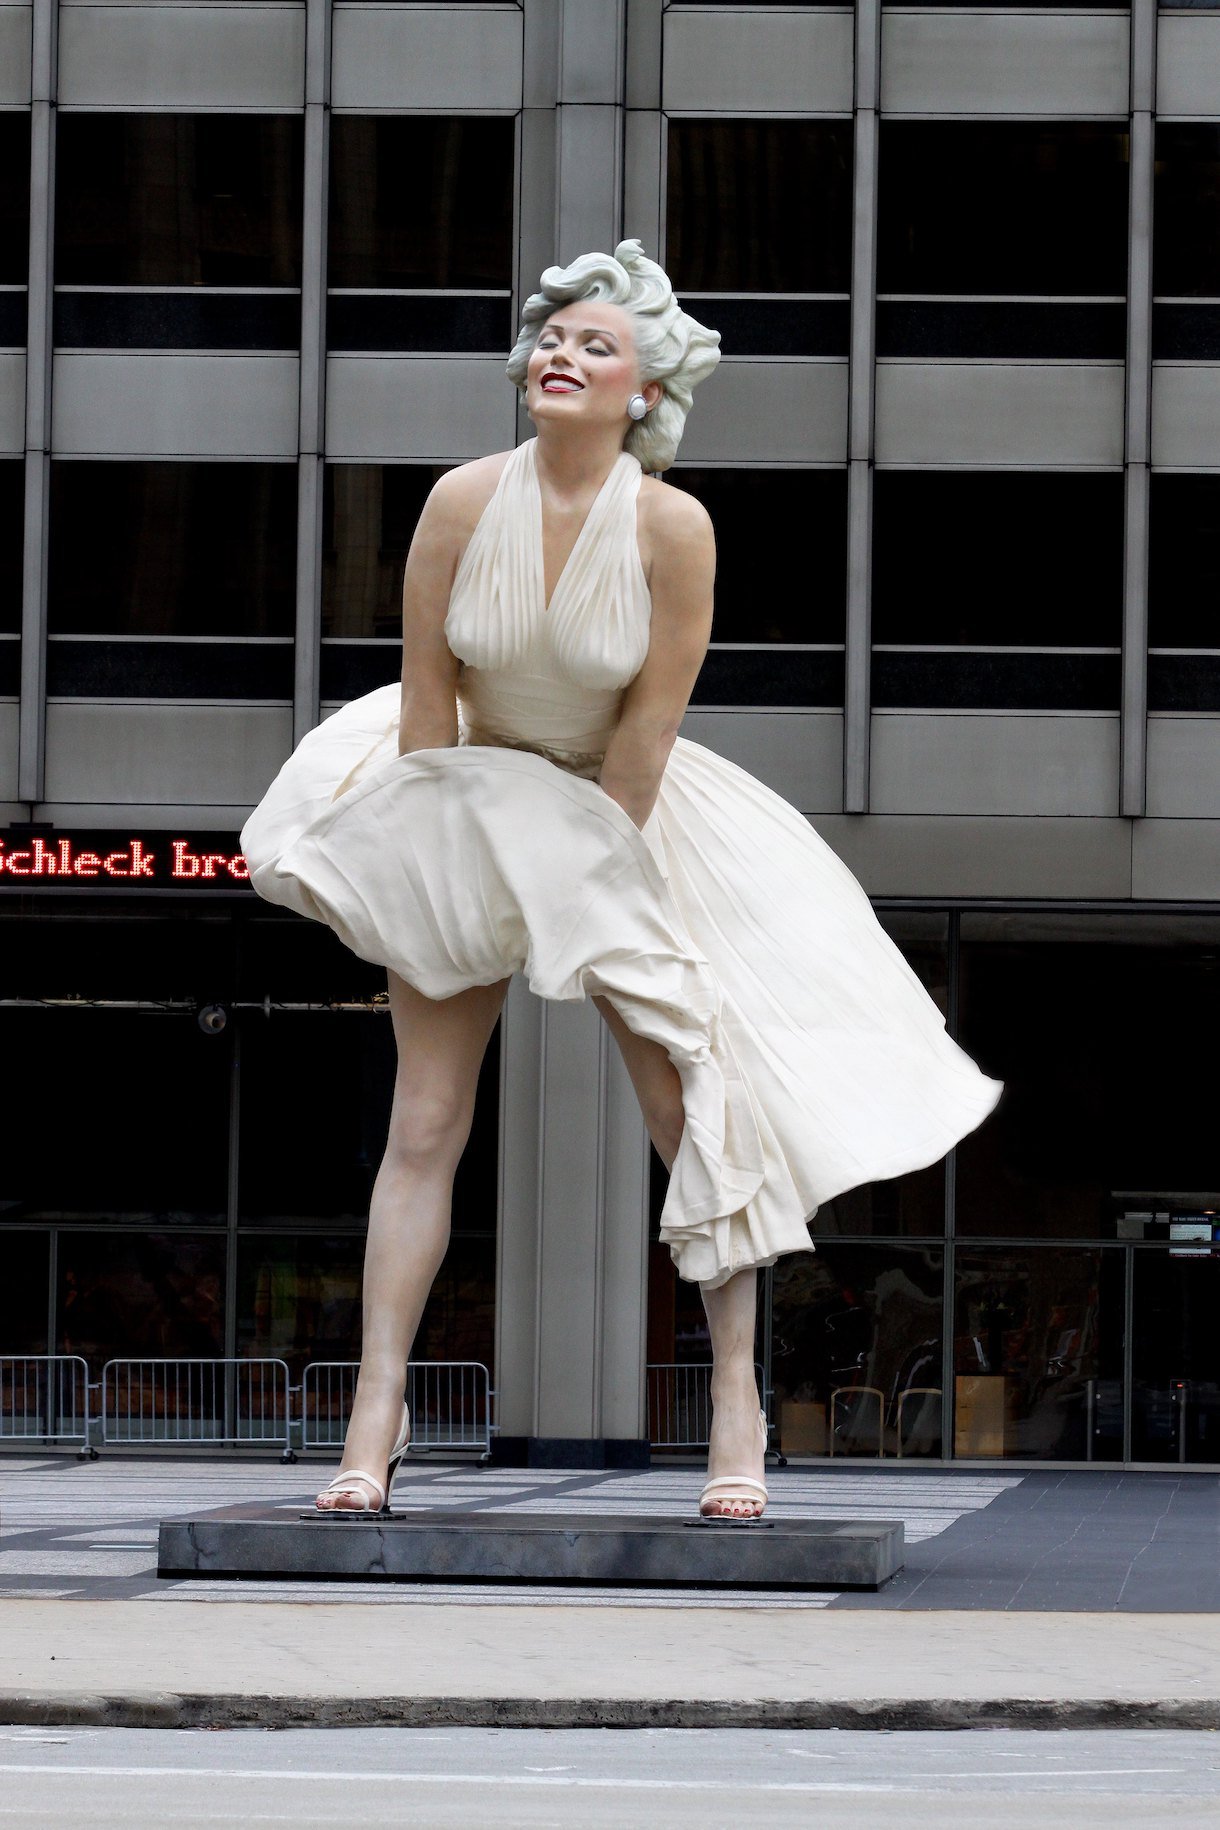 Marilyn Monroe In White Dress | peacecommission.kdsg.gov.ng